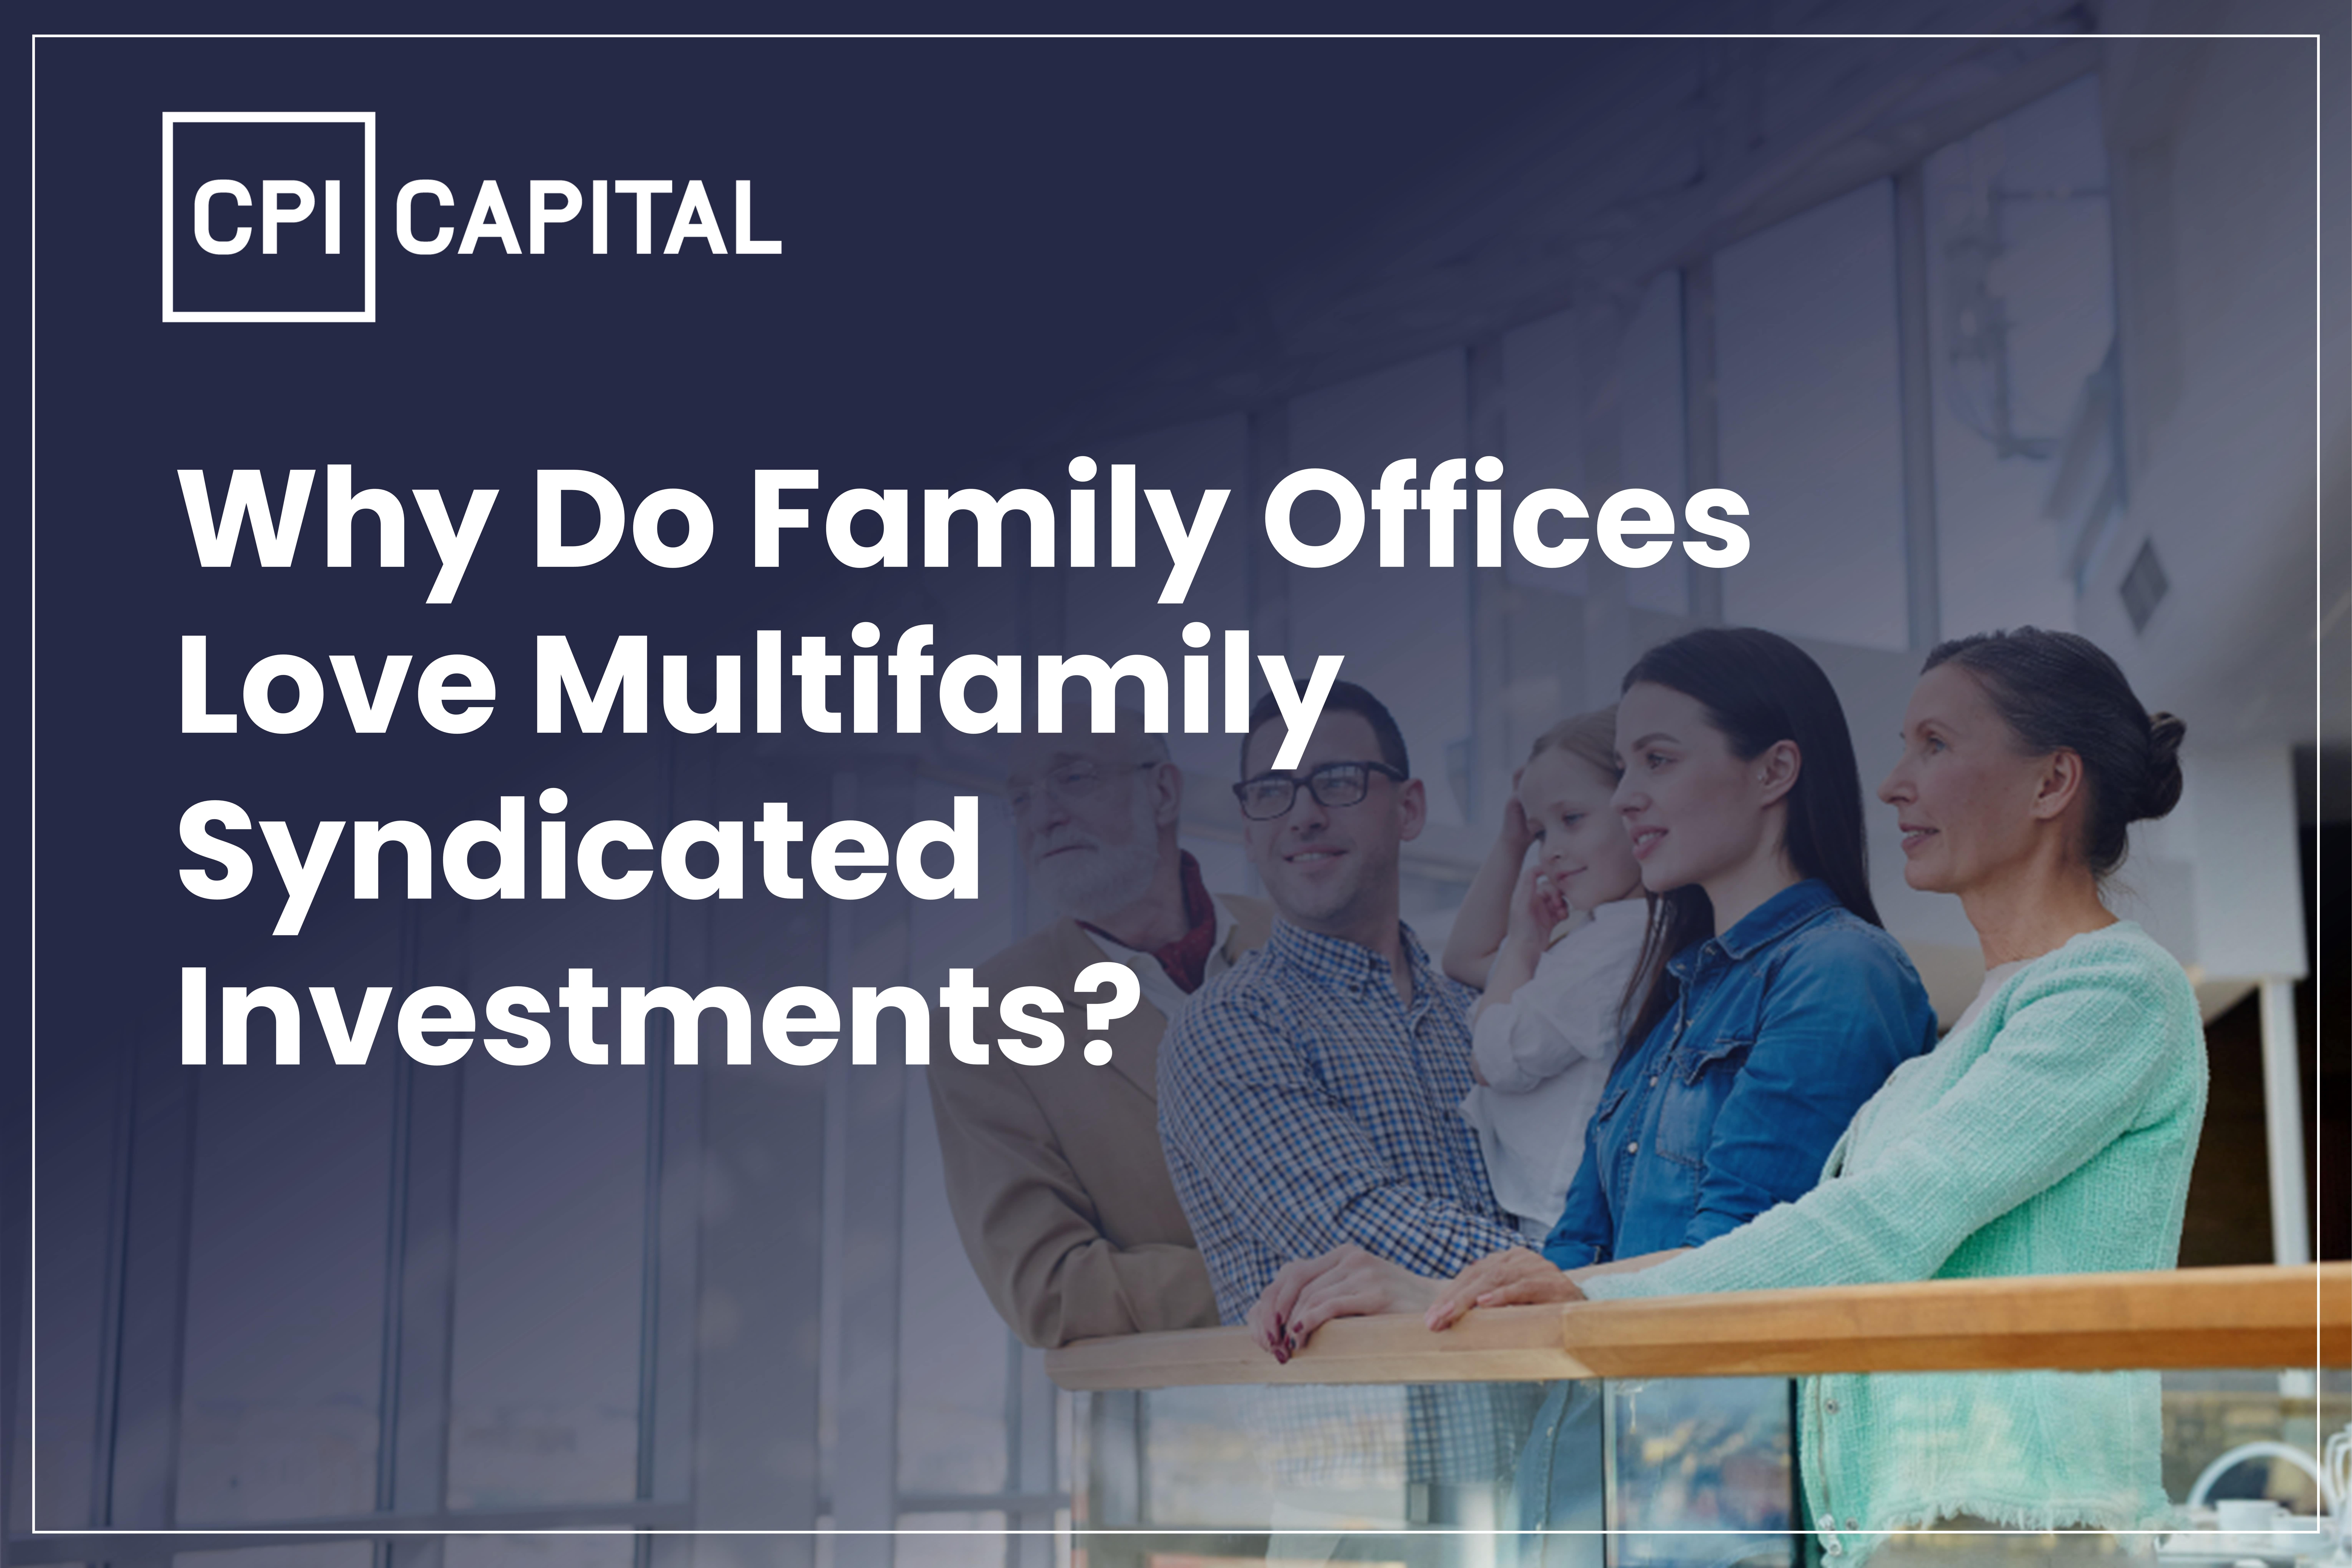 Why Do Family Offices Love Multifamily Syndicated Investments?